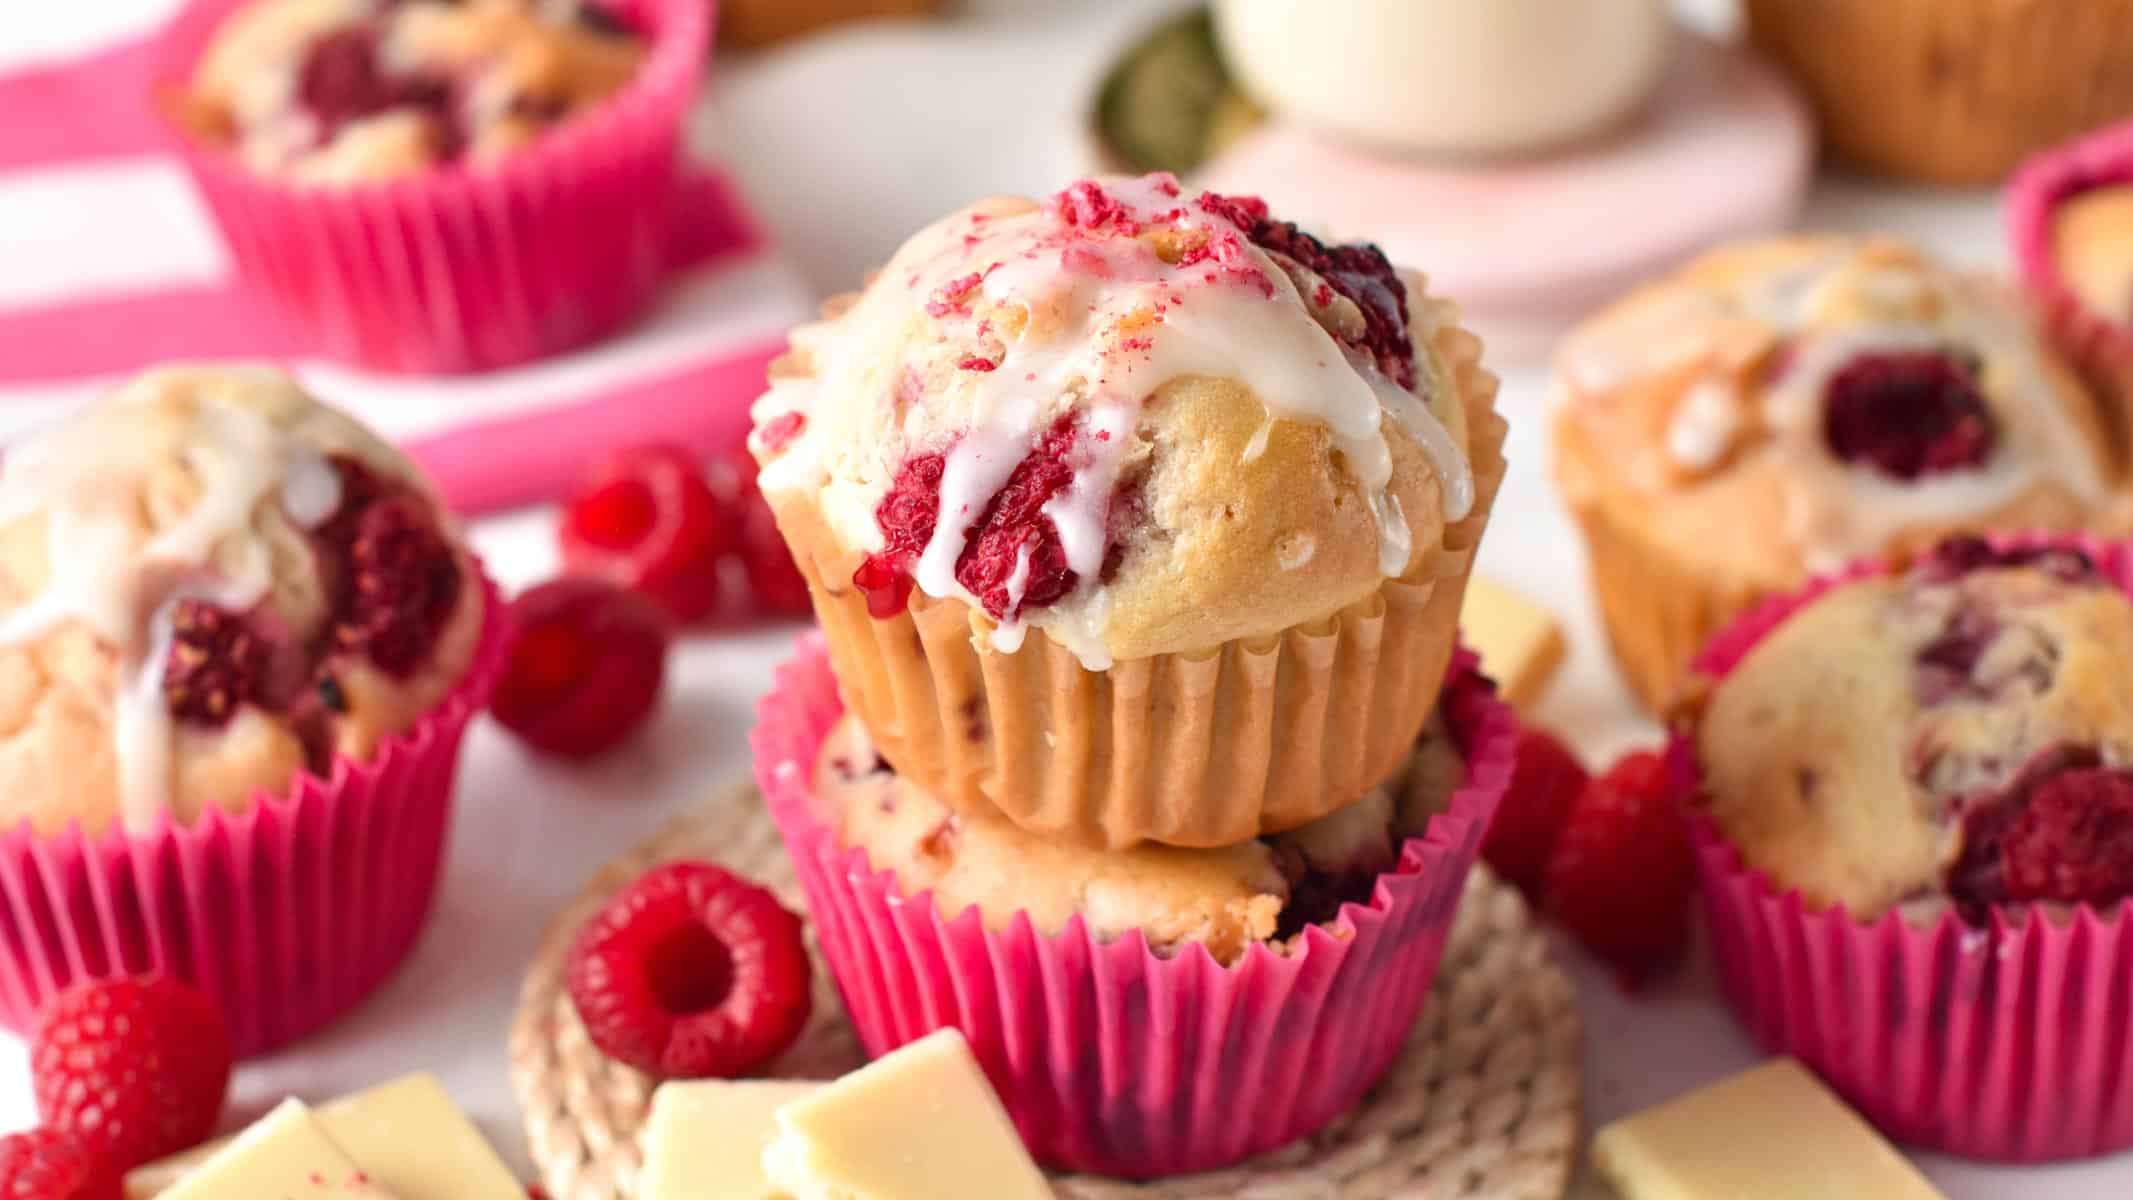 Vegan Raspberry Muffins stacked on a tabletop with their pink muffin case, decorated with fresh raspberries and melted vegan chocolate.